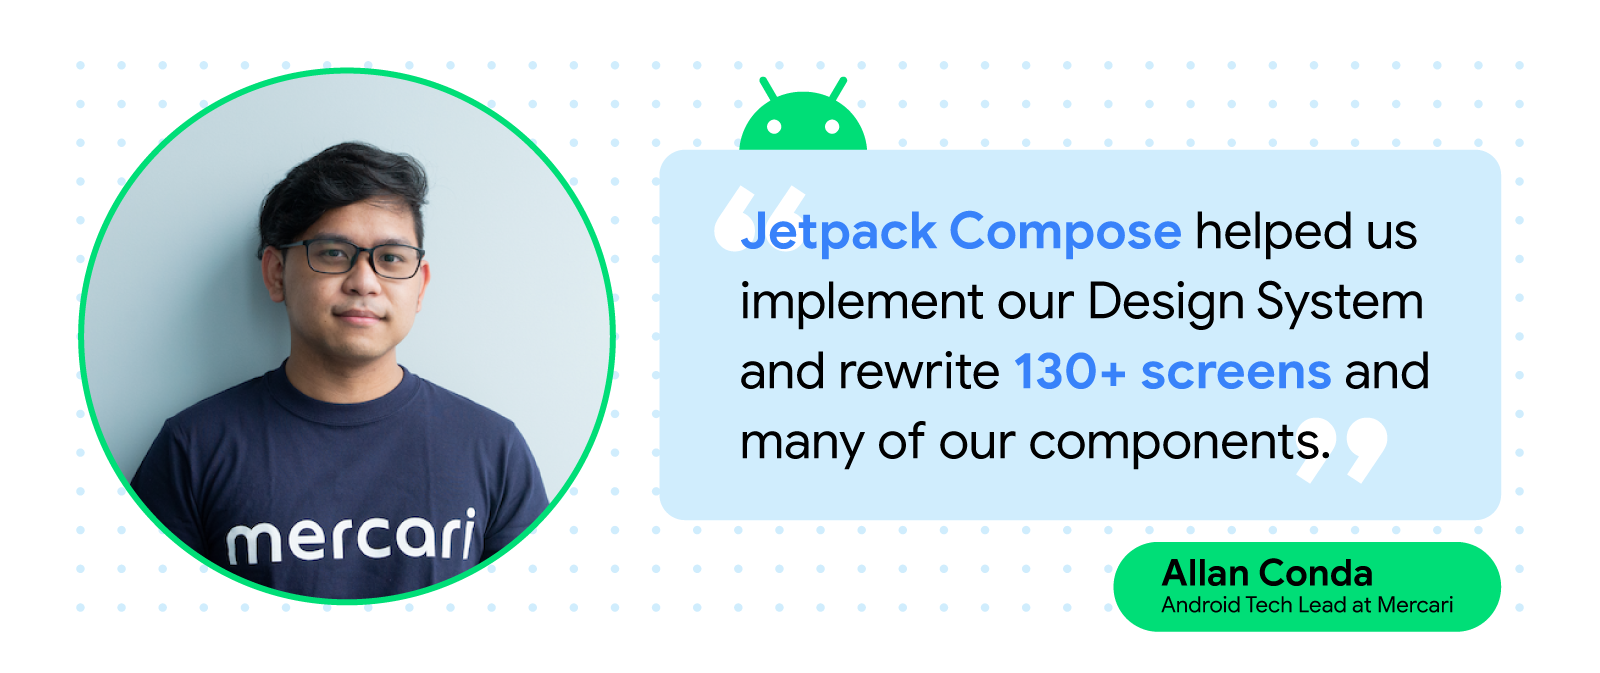 Headshot of Allan Conda, Android Tech Lead at Mercari, similing, with quote text reads 'Jetpack Compose helped us implement our Design System and rewrite 130+ screens and many of our components'